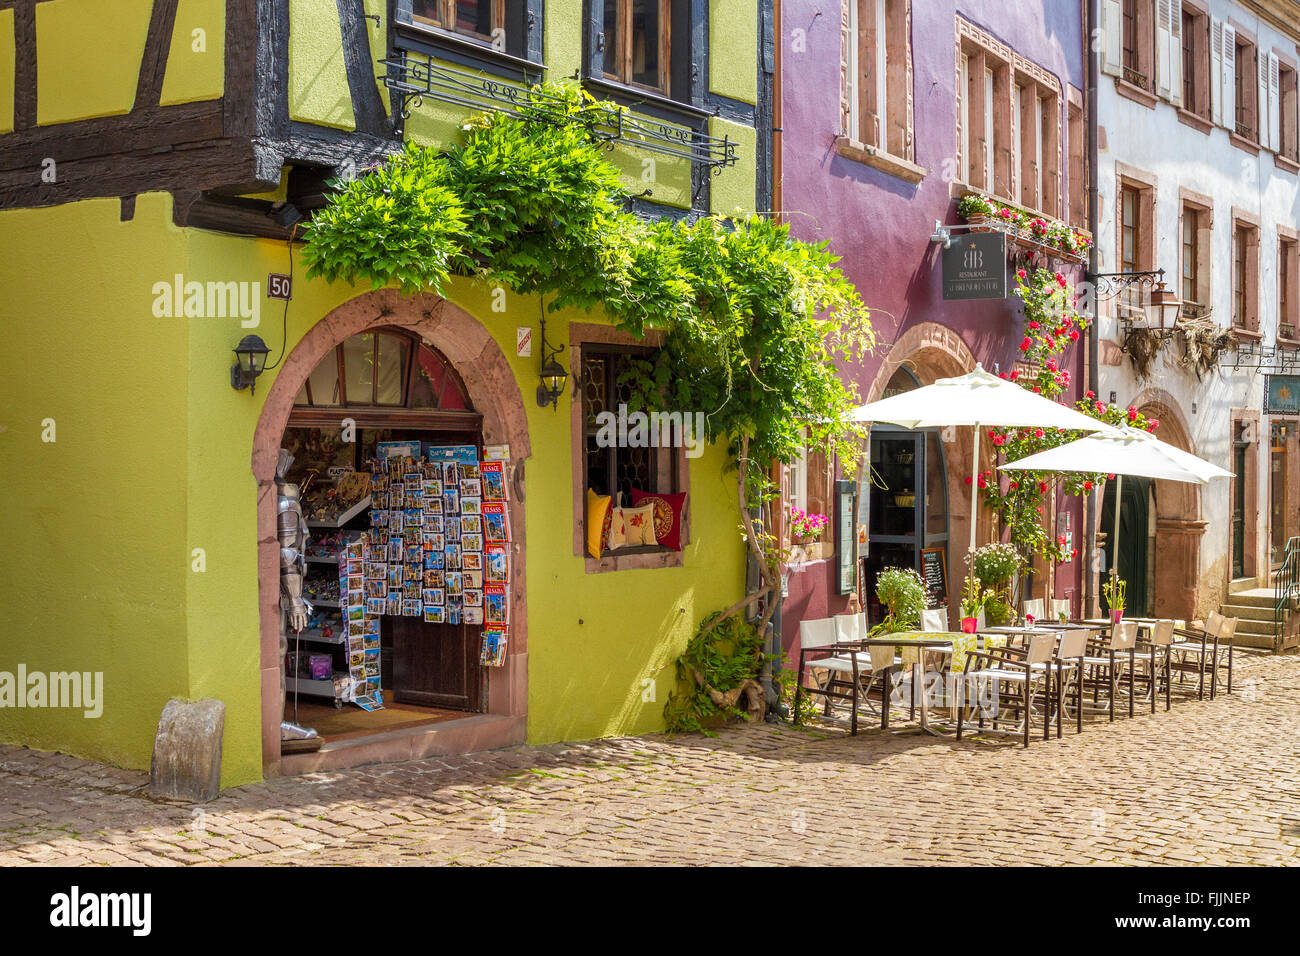 Typical shop and restaurant in Riquewihr, Alsace, Haut-Rhin, France, Europe Stock Photo